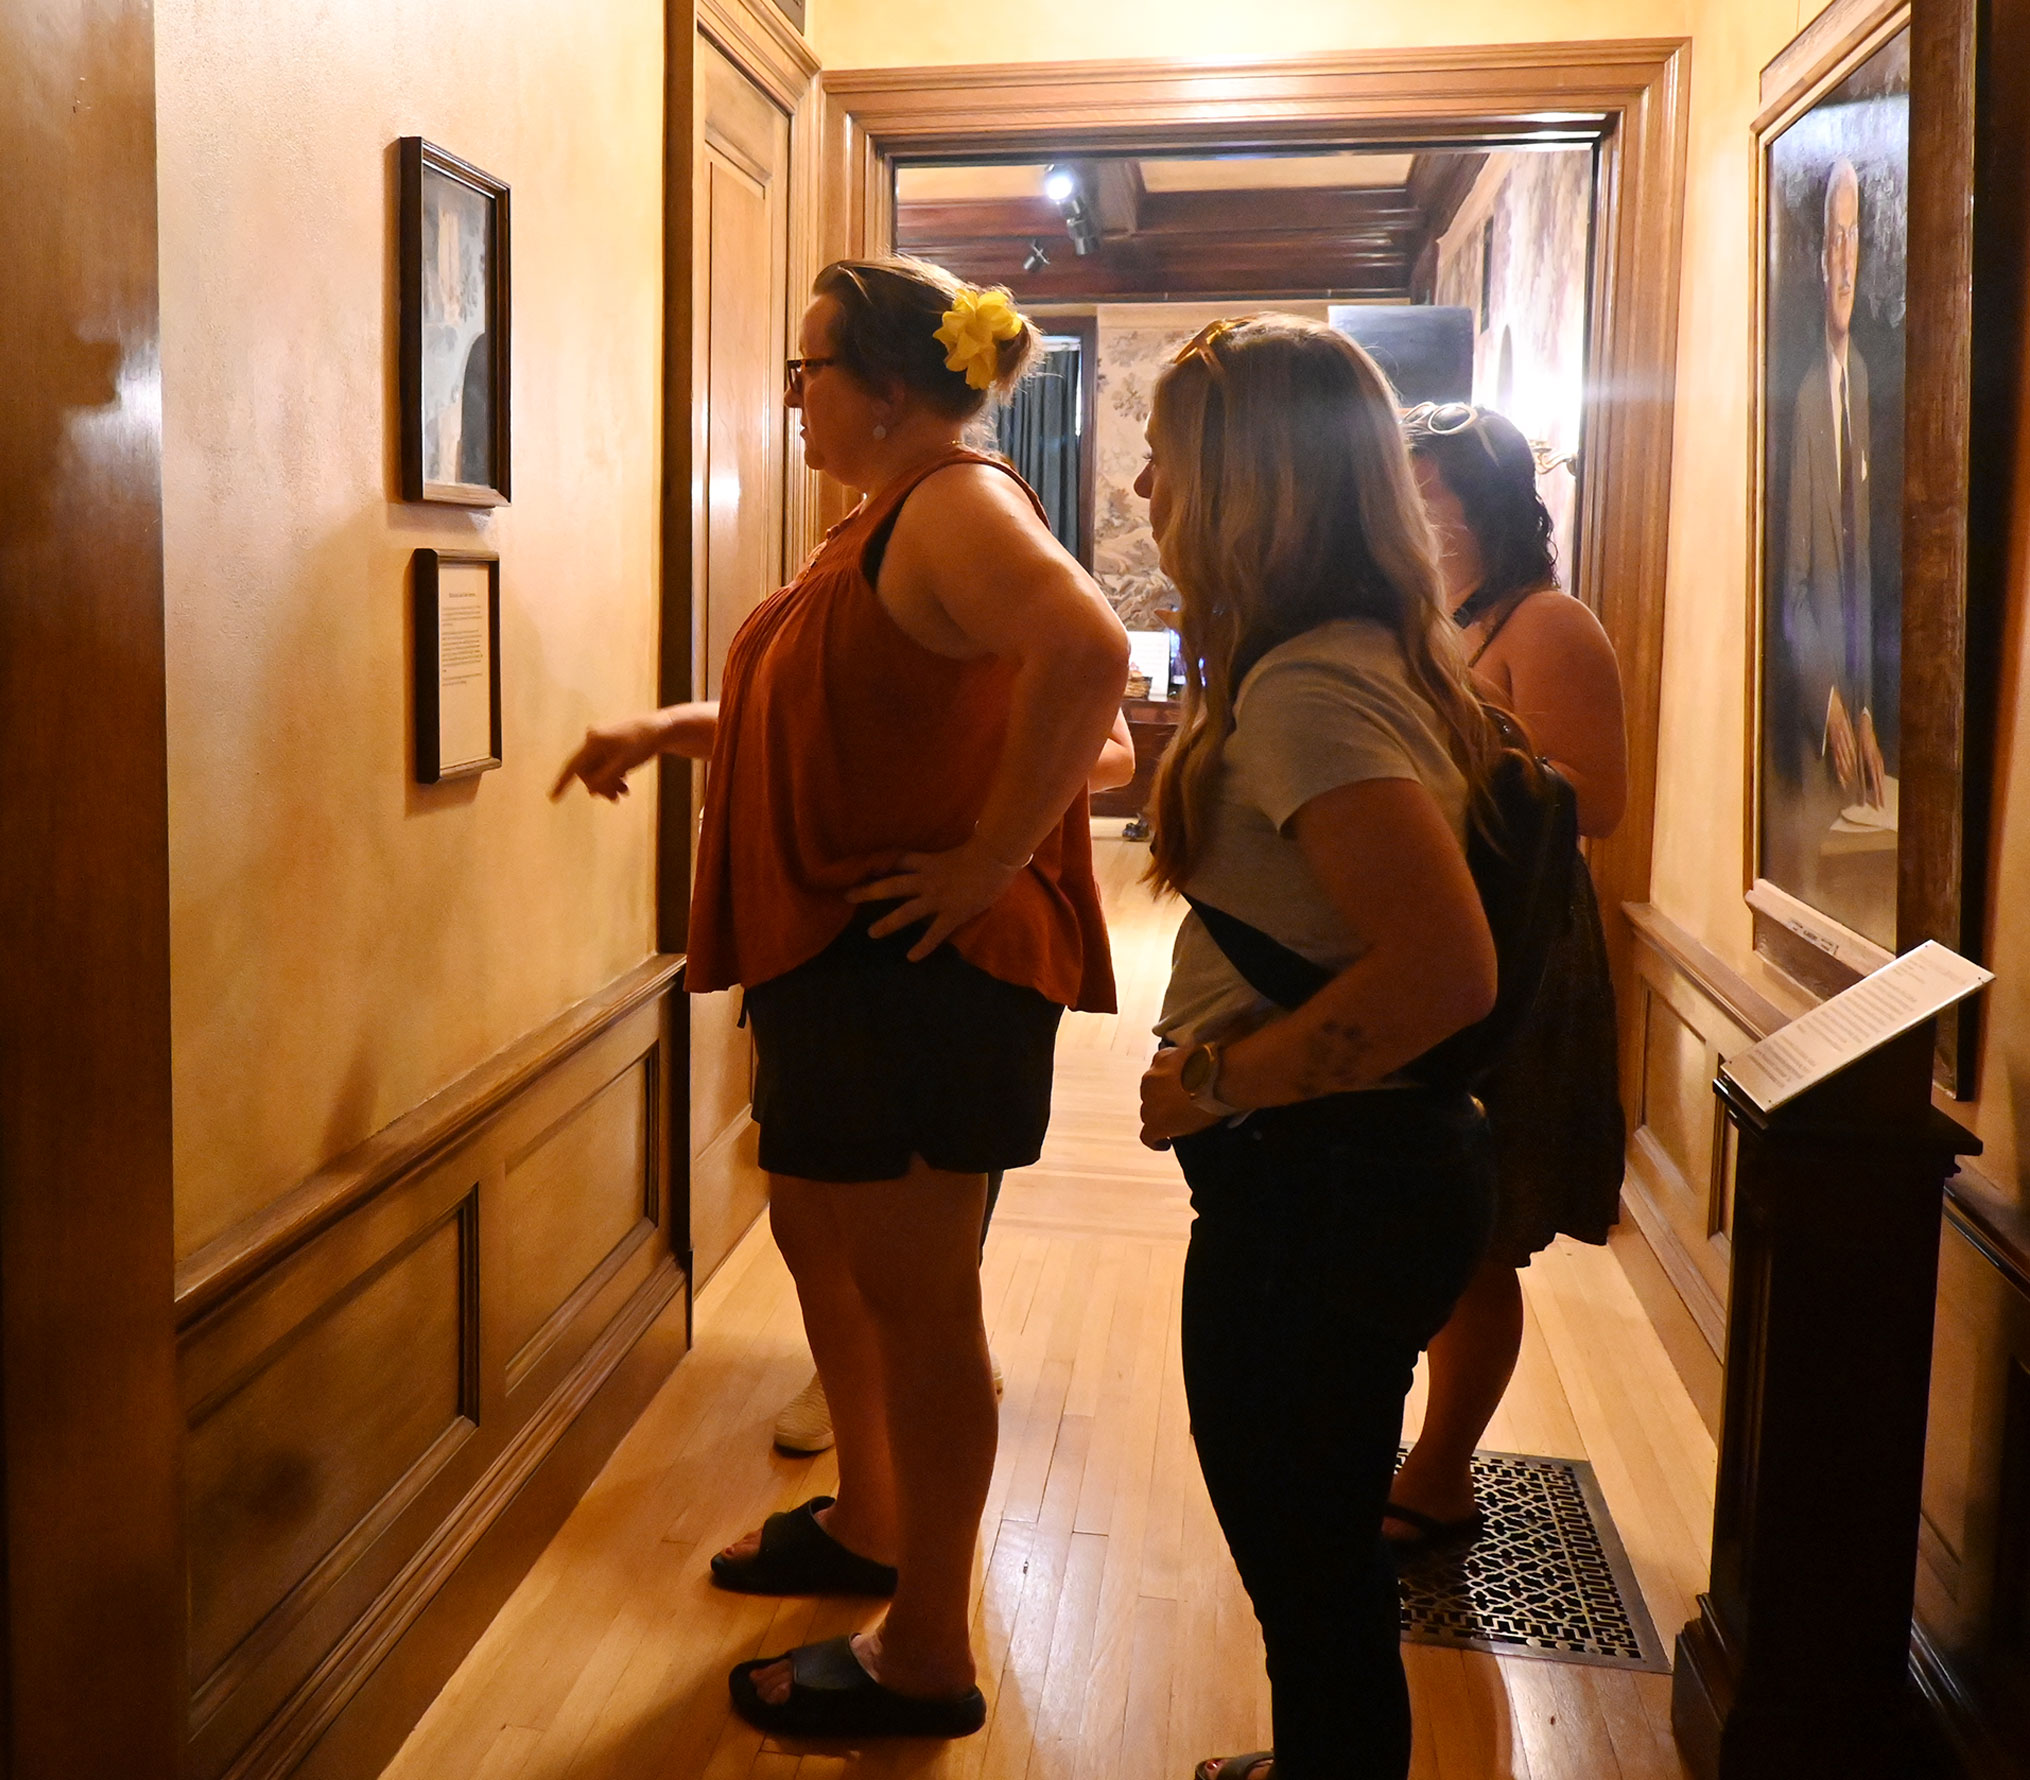 Visitors in the Historic Sawyer Home